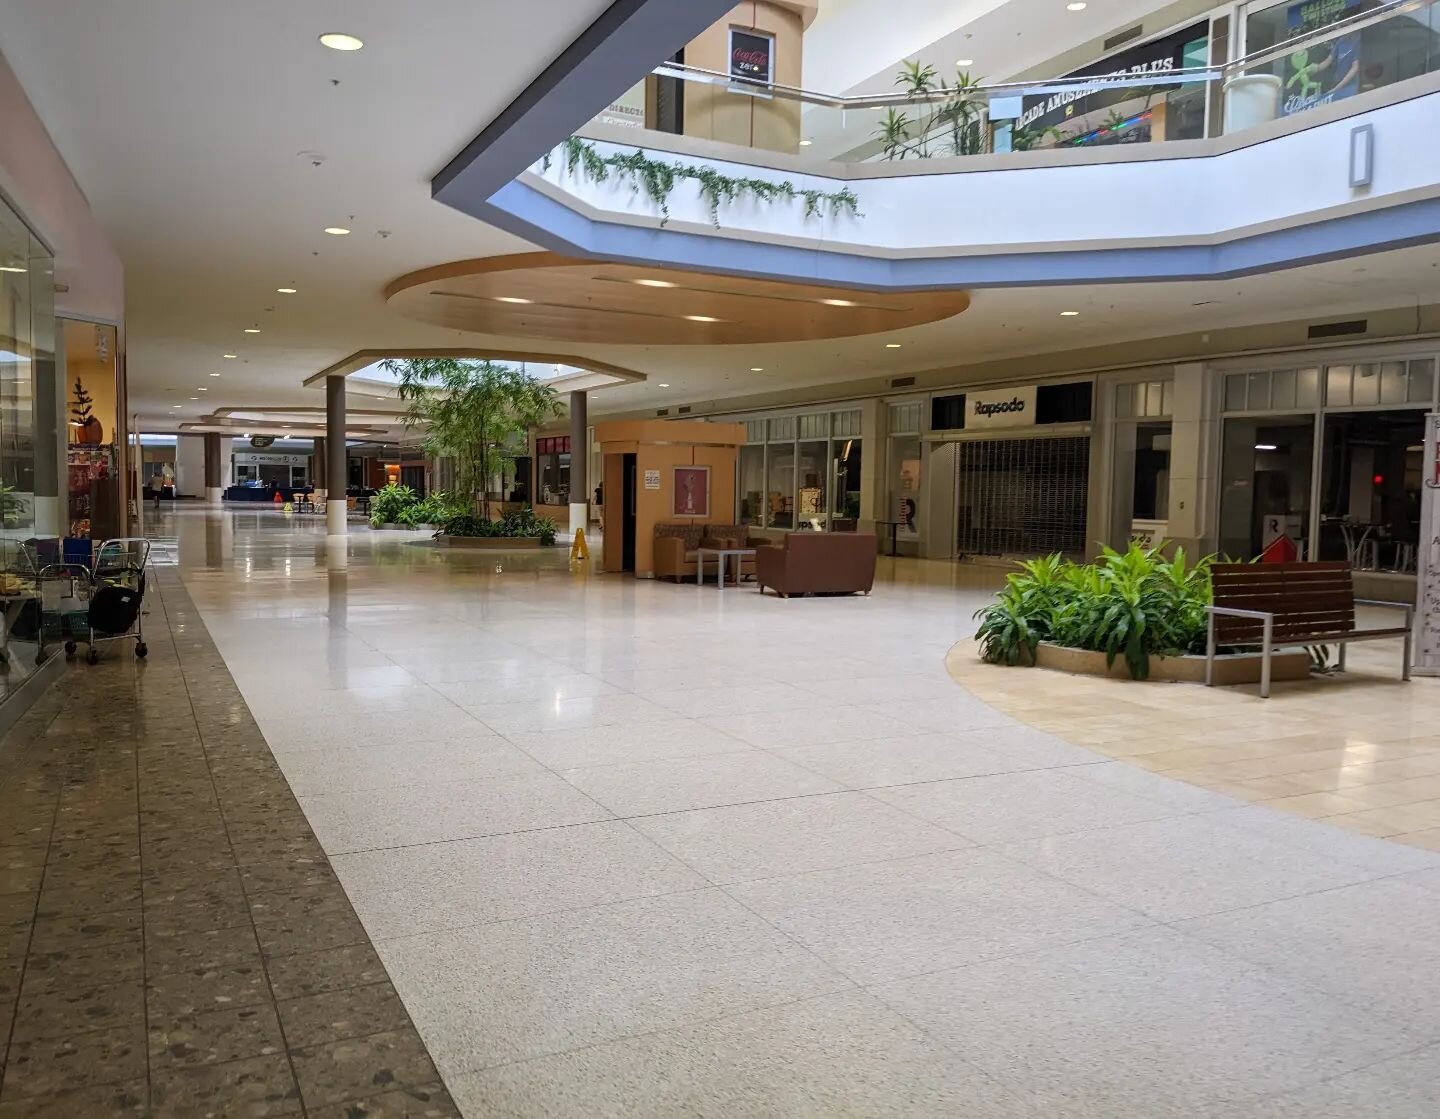 The Chesterfield Mall is an interesting experience to say the least. With almost all of the stores closed it's a fairly barren place. The bright spot is definitely the vintage stock which is closed off to the rest of the mall. I would say the mall is